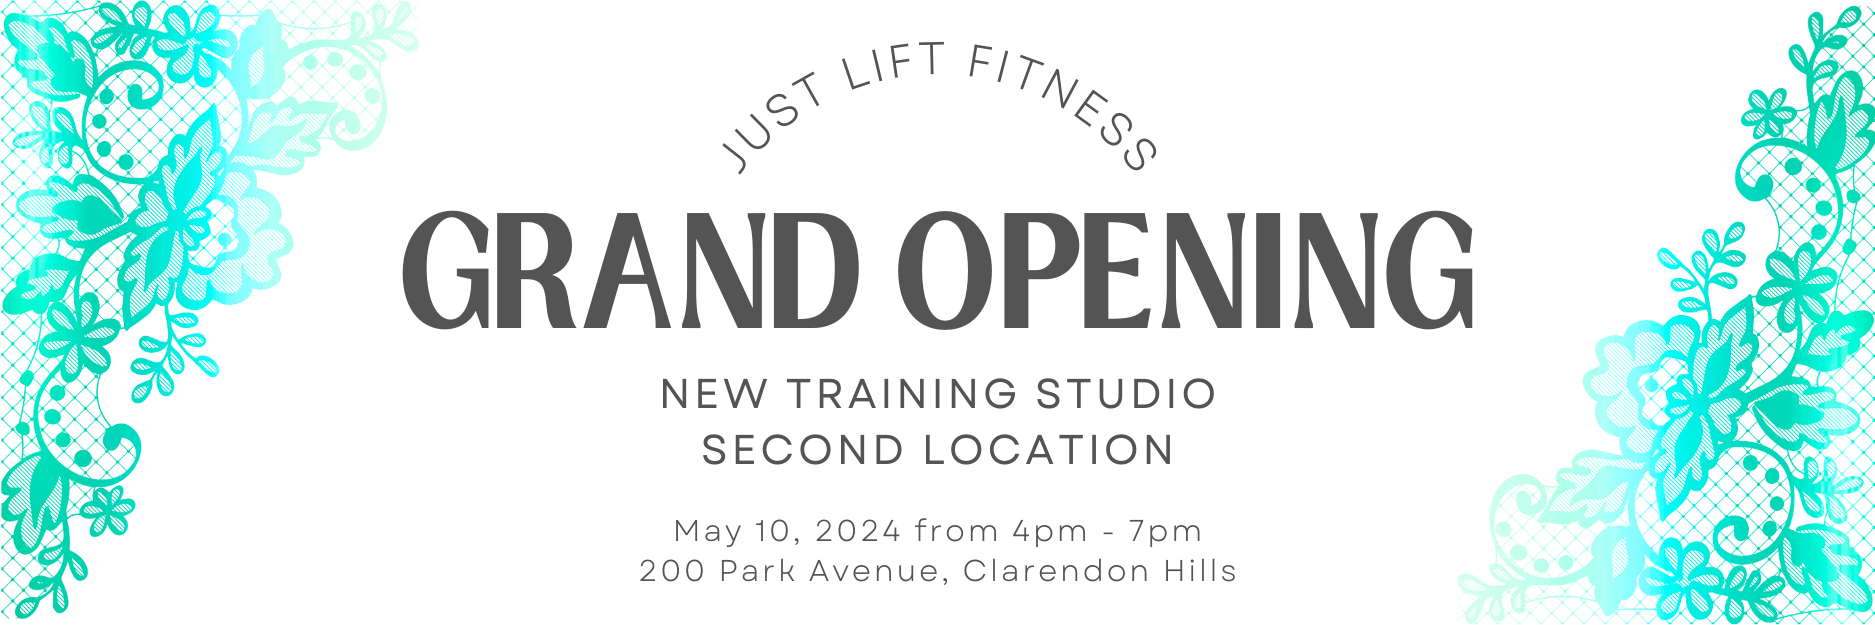 Just Lift Fitness - Grand Opening